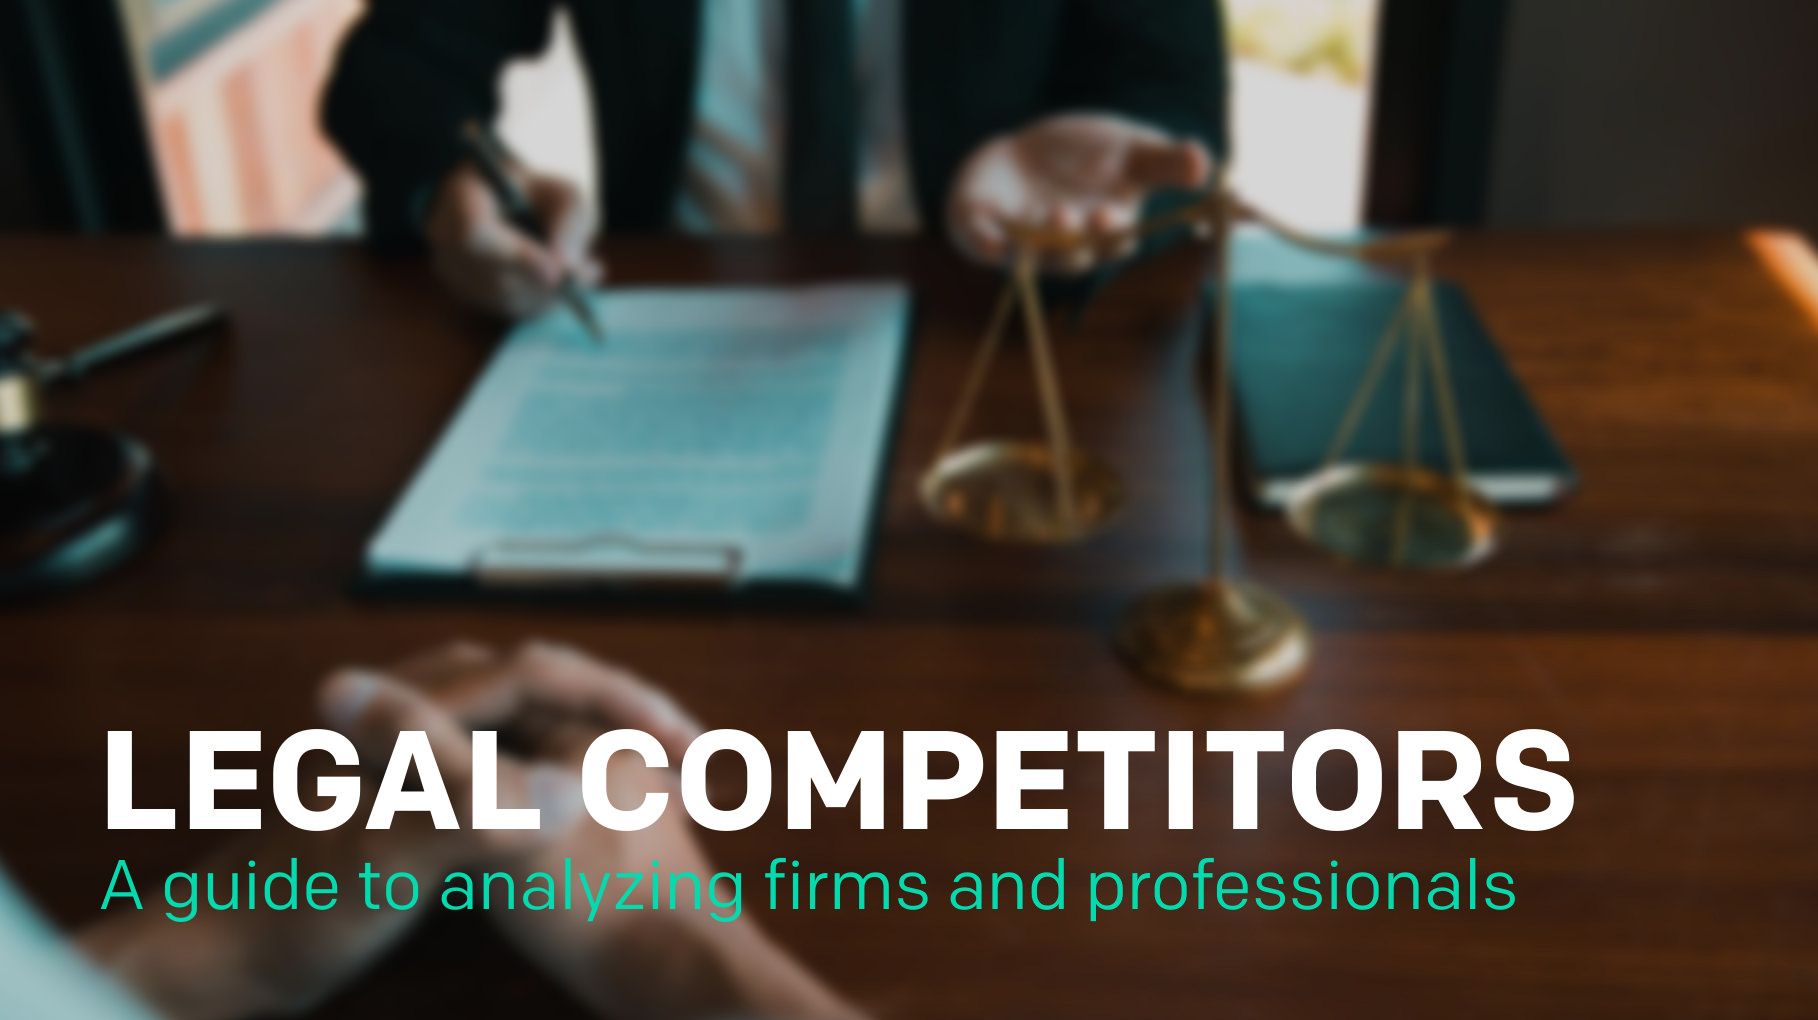 Legal competitors: A guide to analyzing firms and professionals